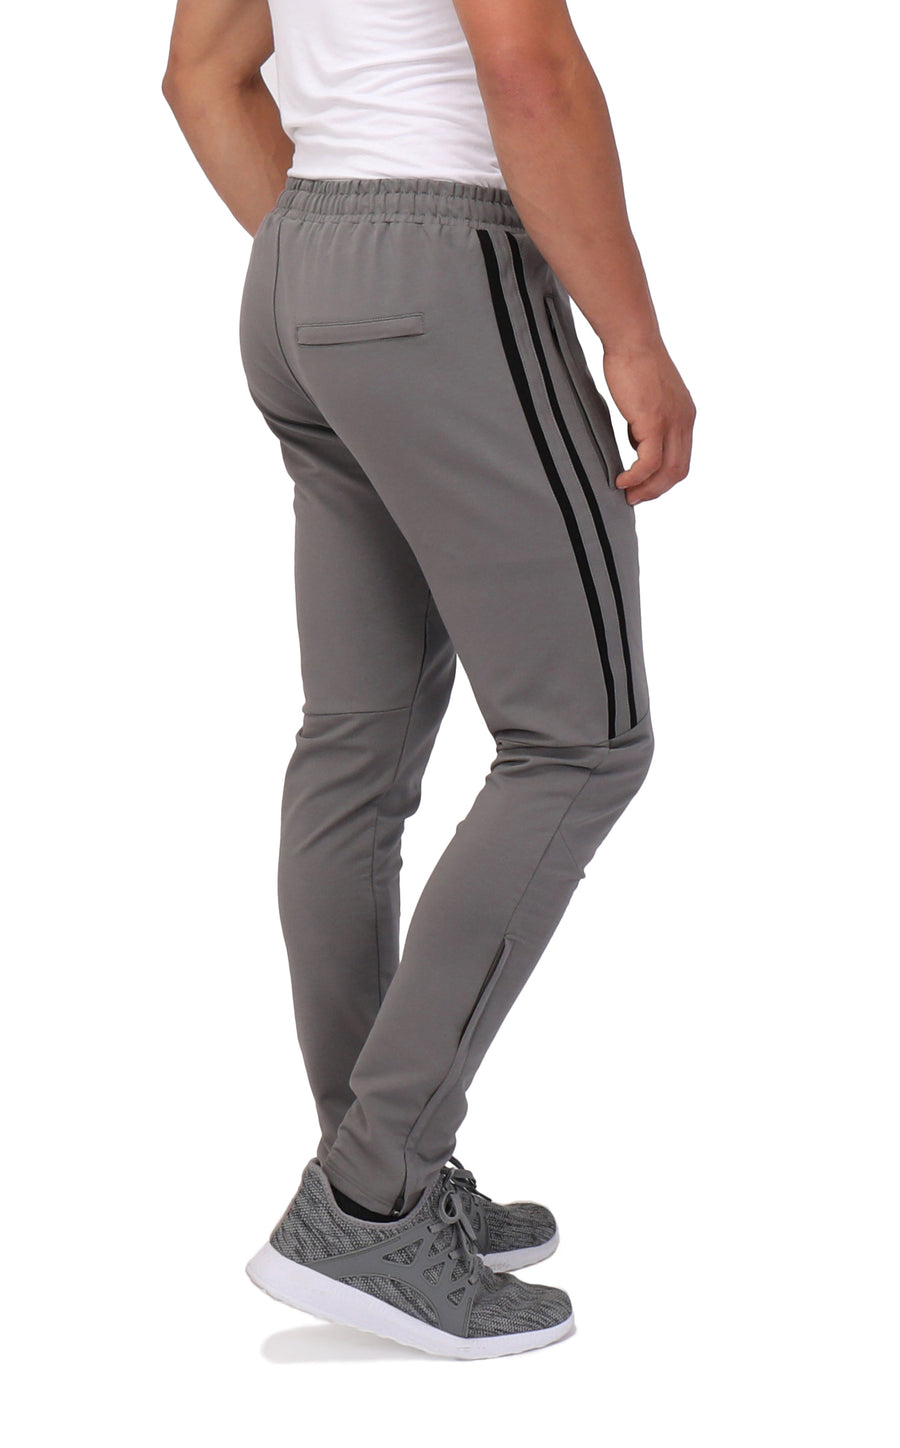 SCR SPORTSWEAR Men's Sweatpants All Day Comfort Workout Athletic Activewear  Lounge Pants with Zipper Pockets Long (XL x 34L, Heather Grey-K434) - Yahoo  Shopping